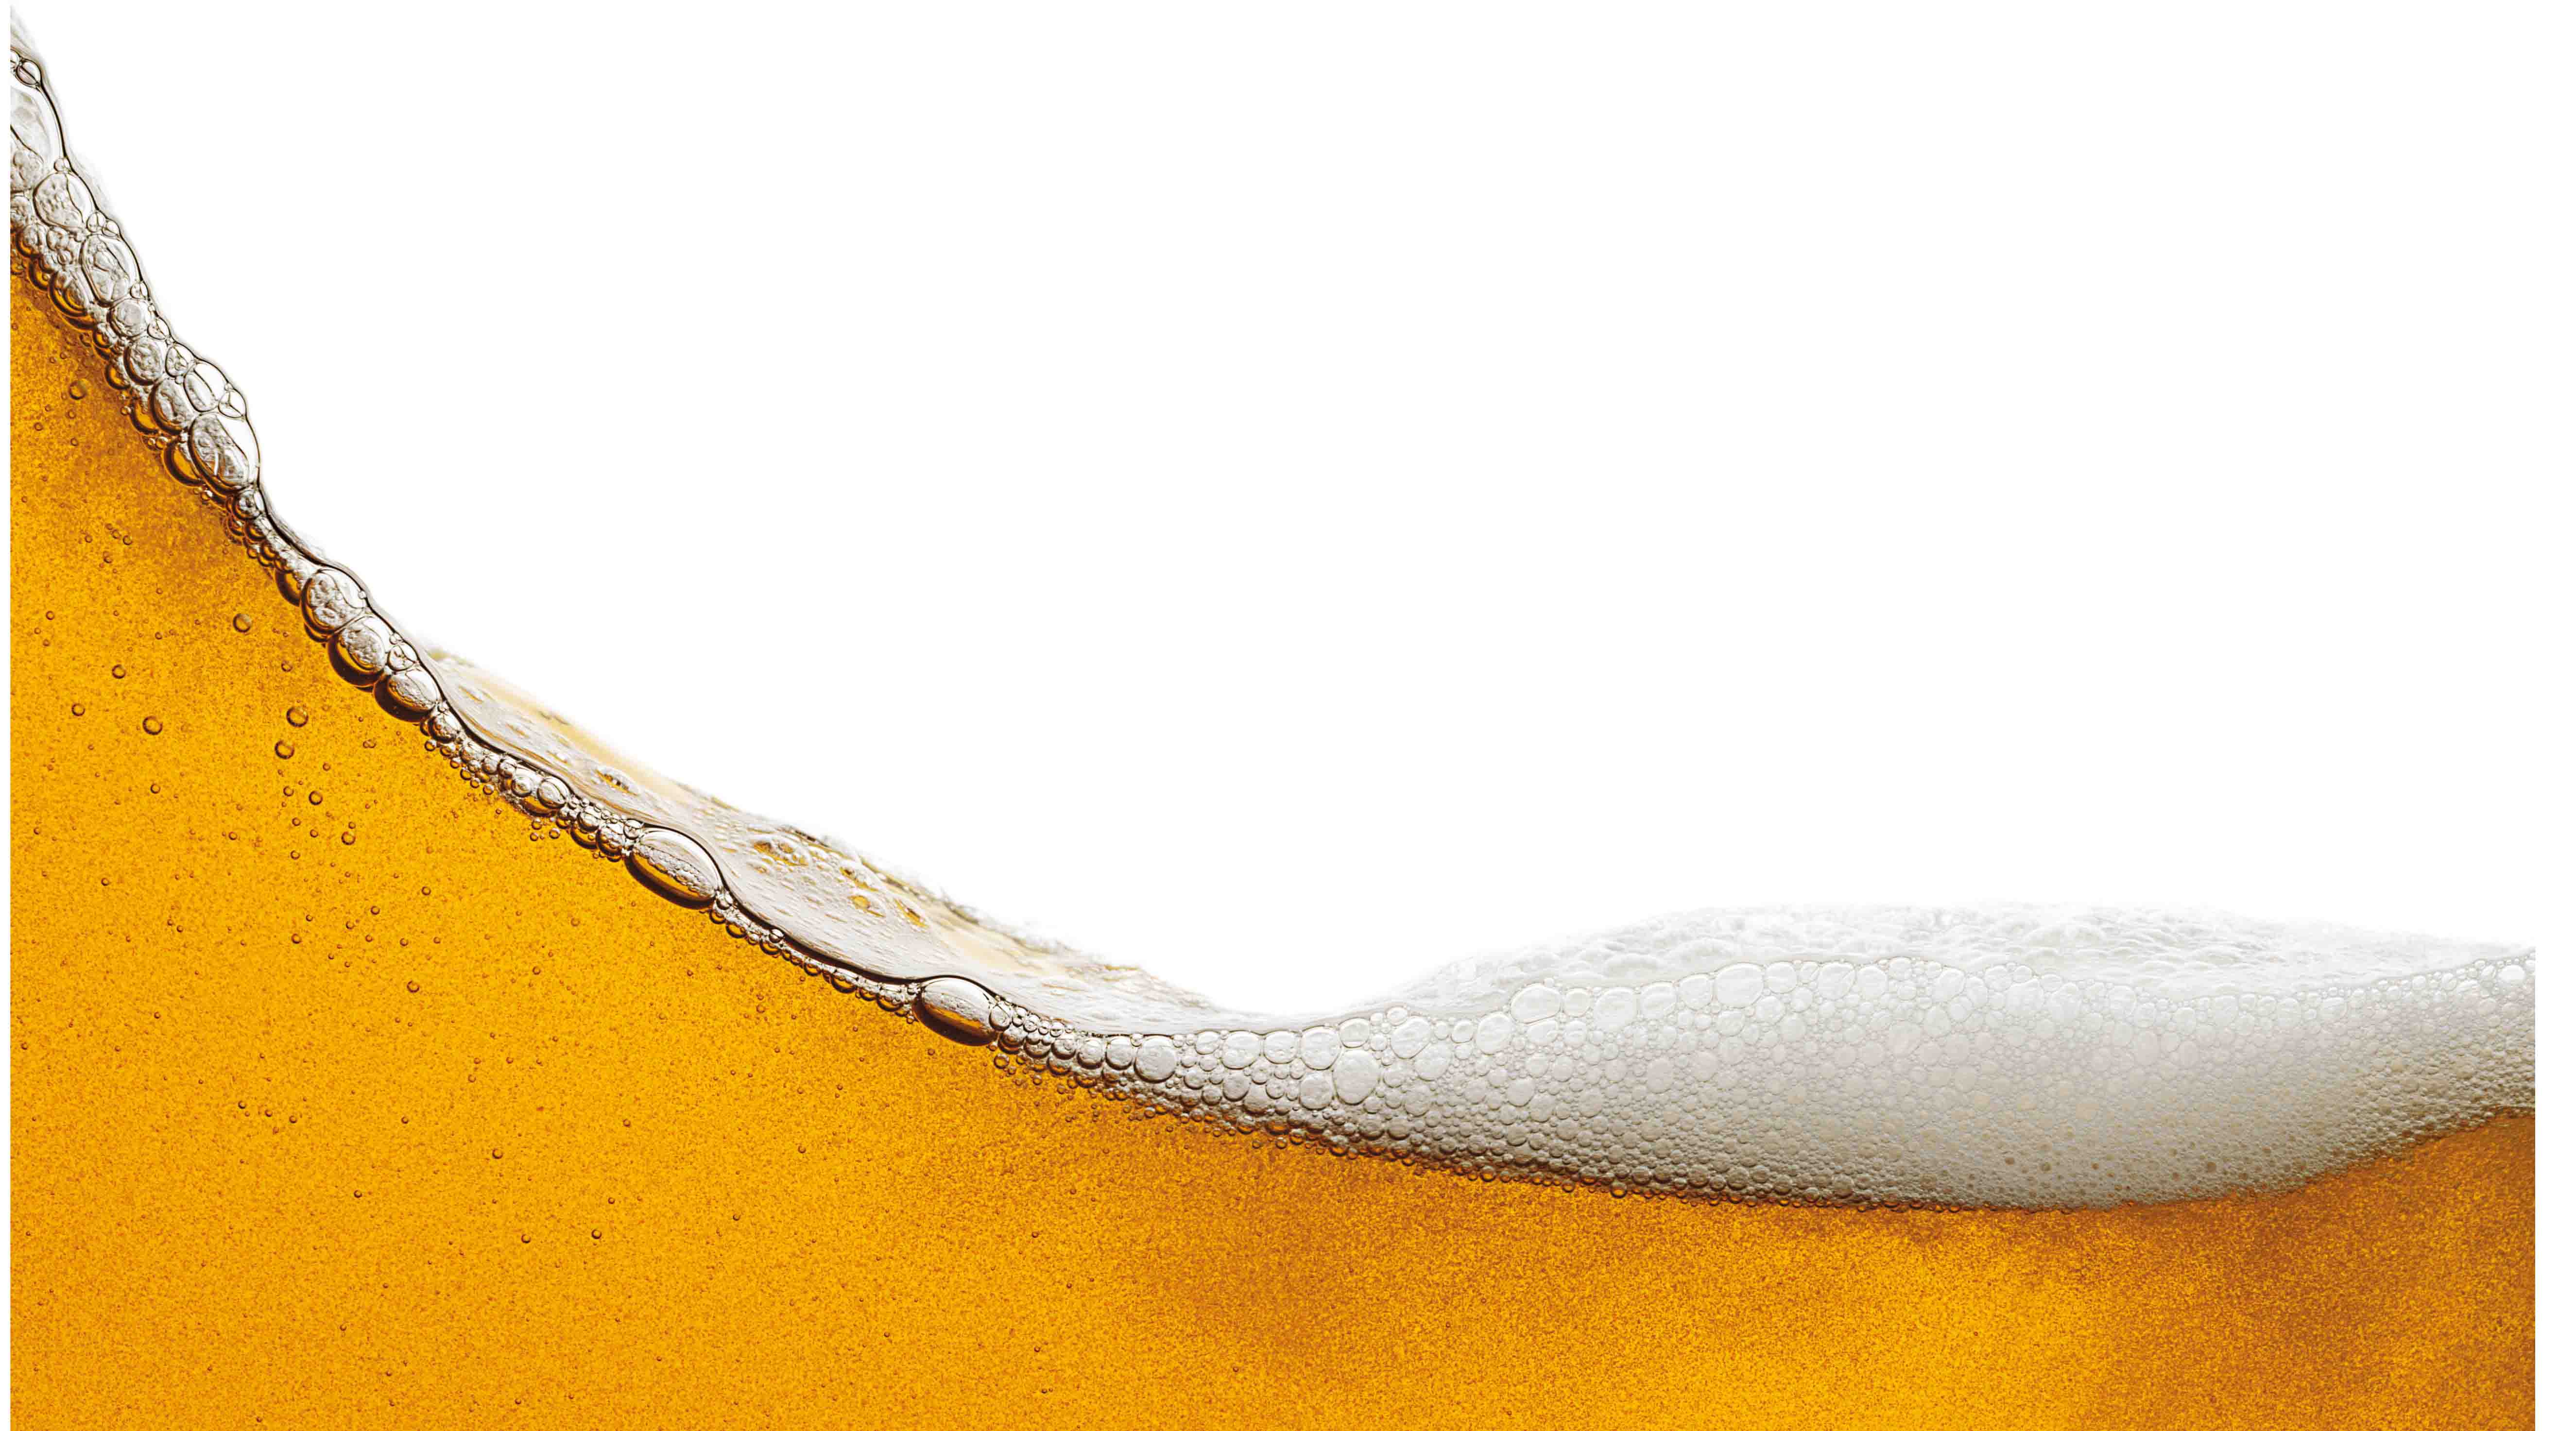 Beer volumes fell 17.4% from April to June this year compared to the same Quarter in 2019.